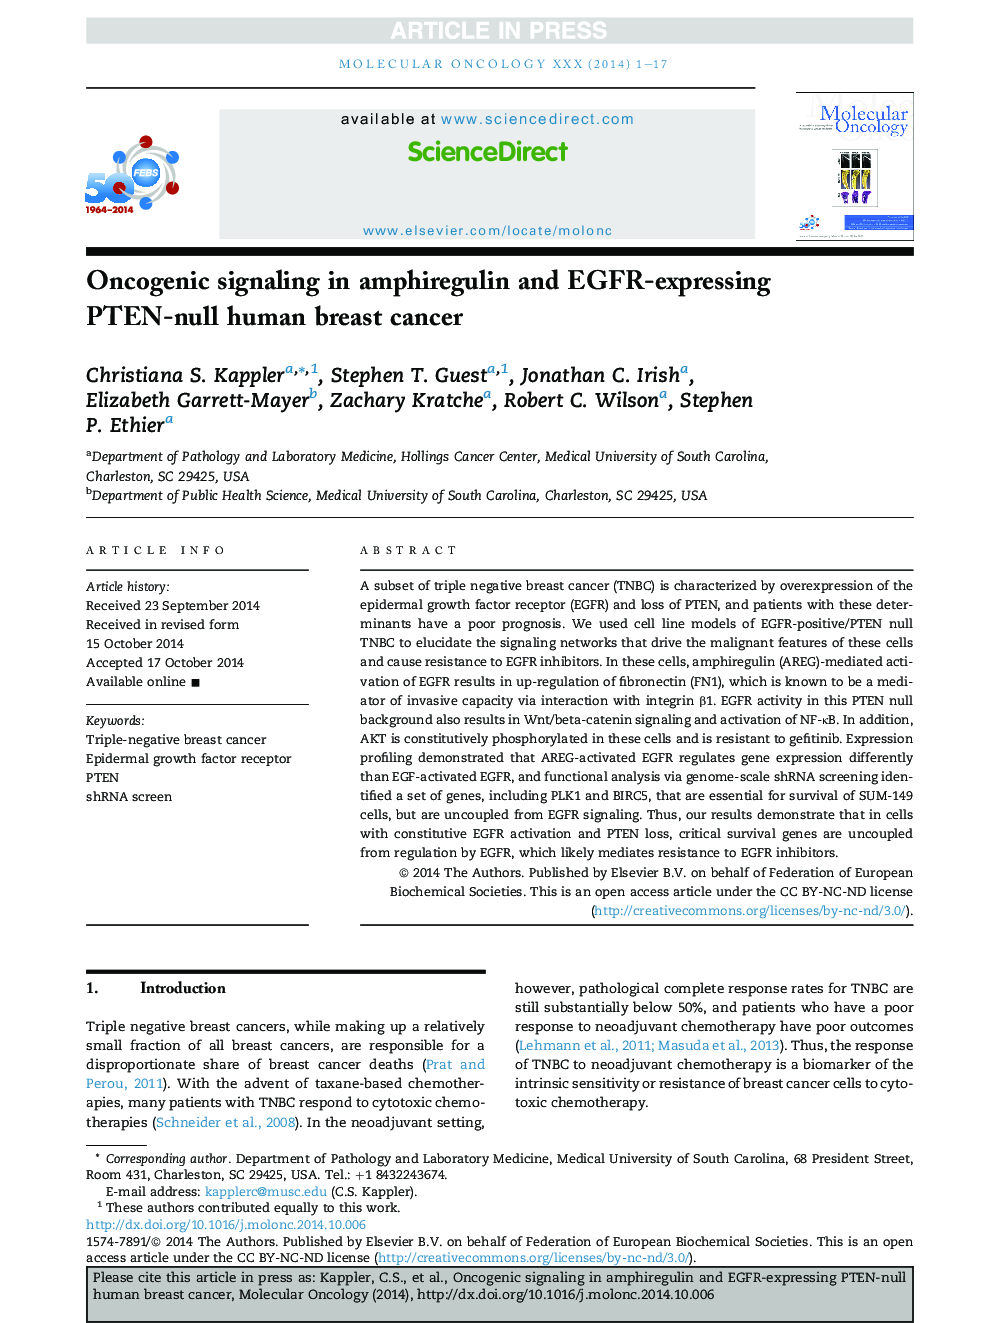 Oncogenic signaling in amphiregulin and EGFR-expressing PTEN-null human breast cancer